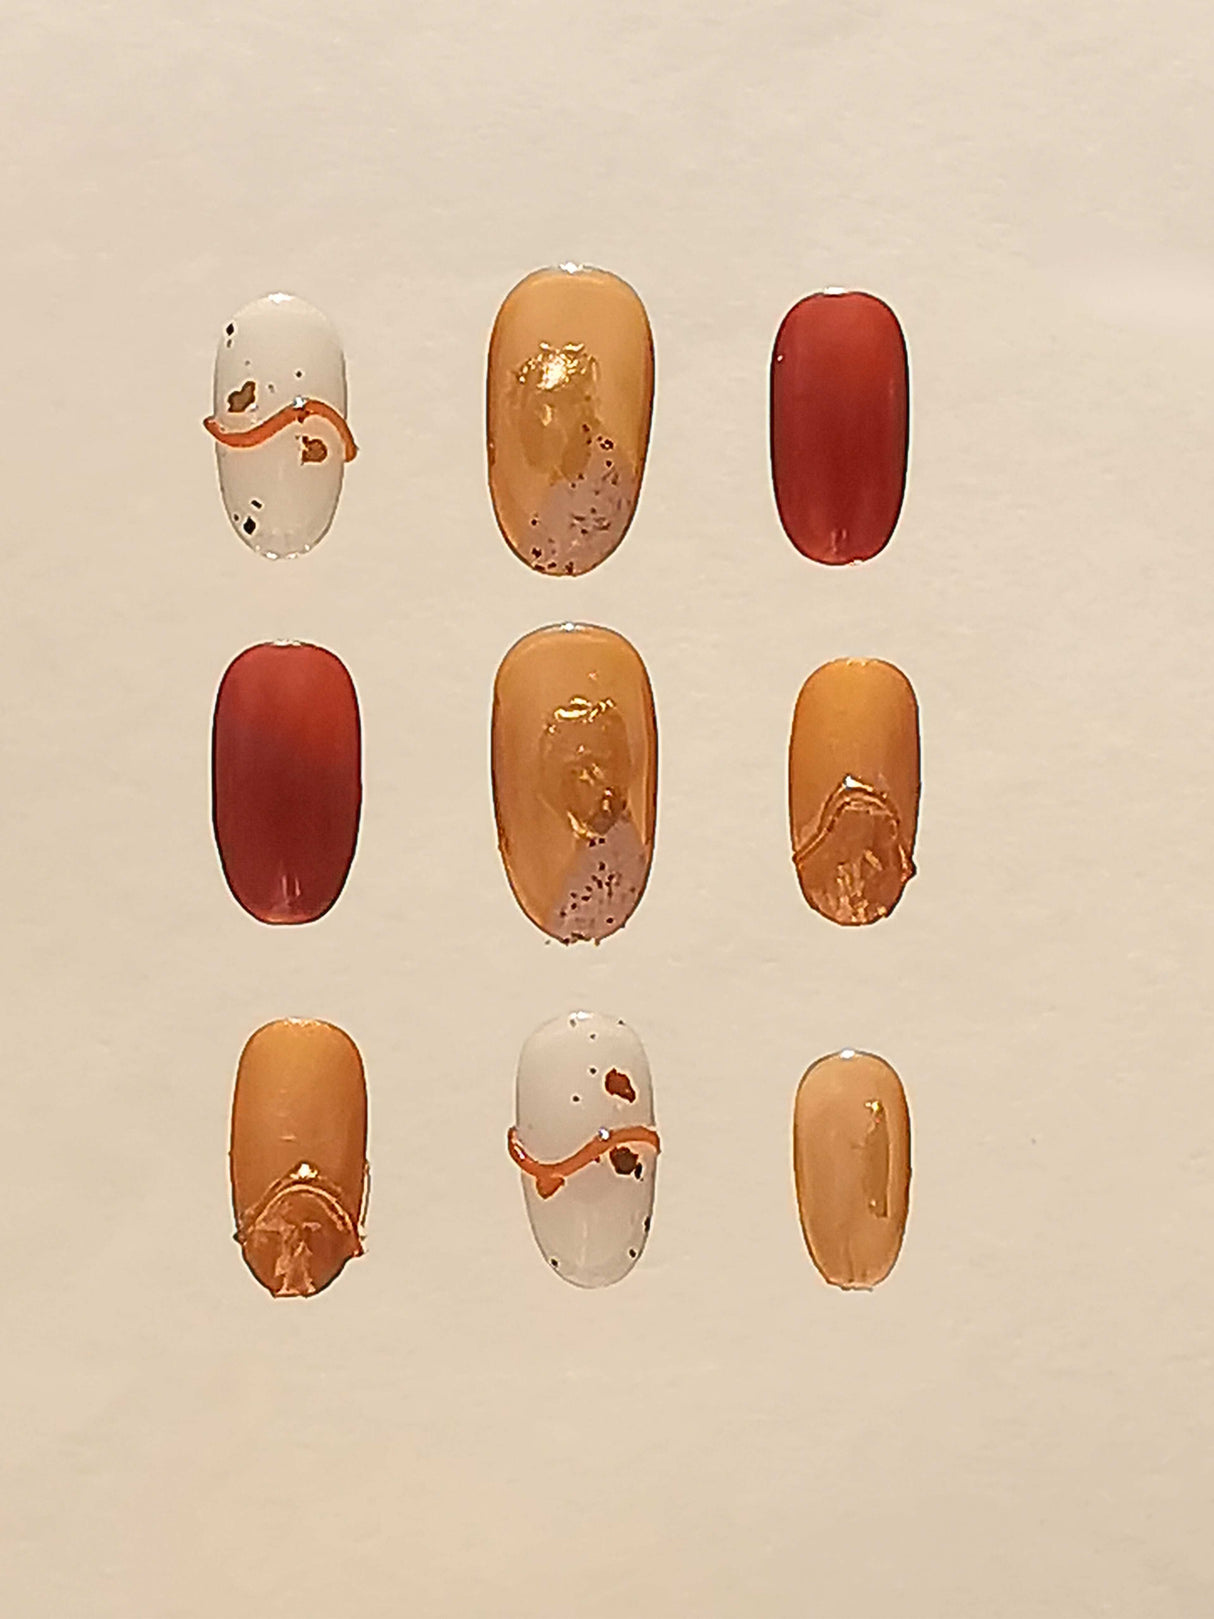 Cute nails for business casual, with playful designs including color, glossiness, glitter, irregular patches, and a small orange smiley face. Suitable for various occasions.